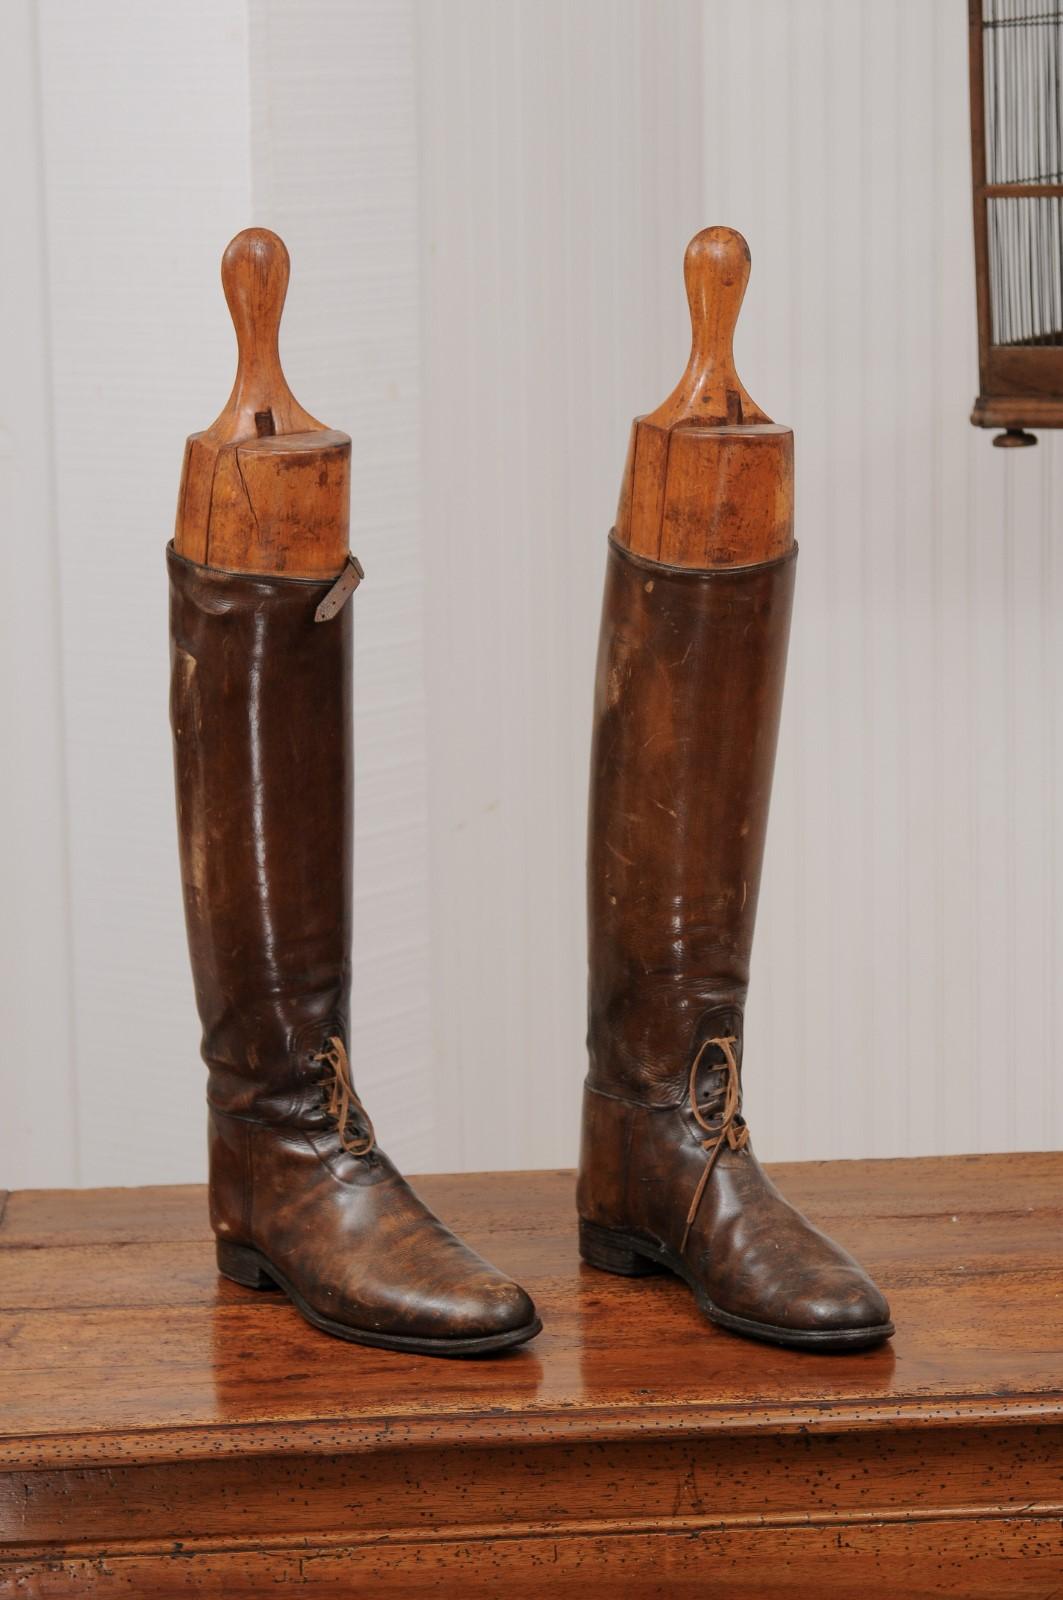 Antique Riding Boots - 5 For Sale on 1stDibs